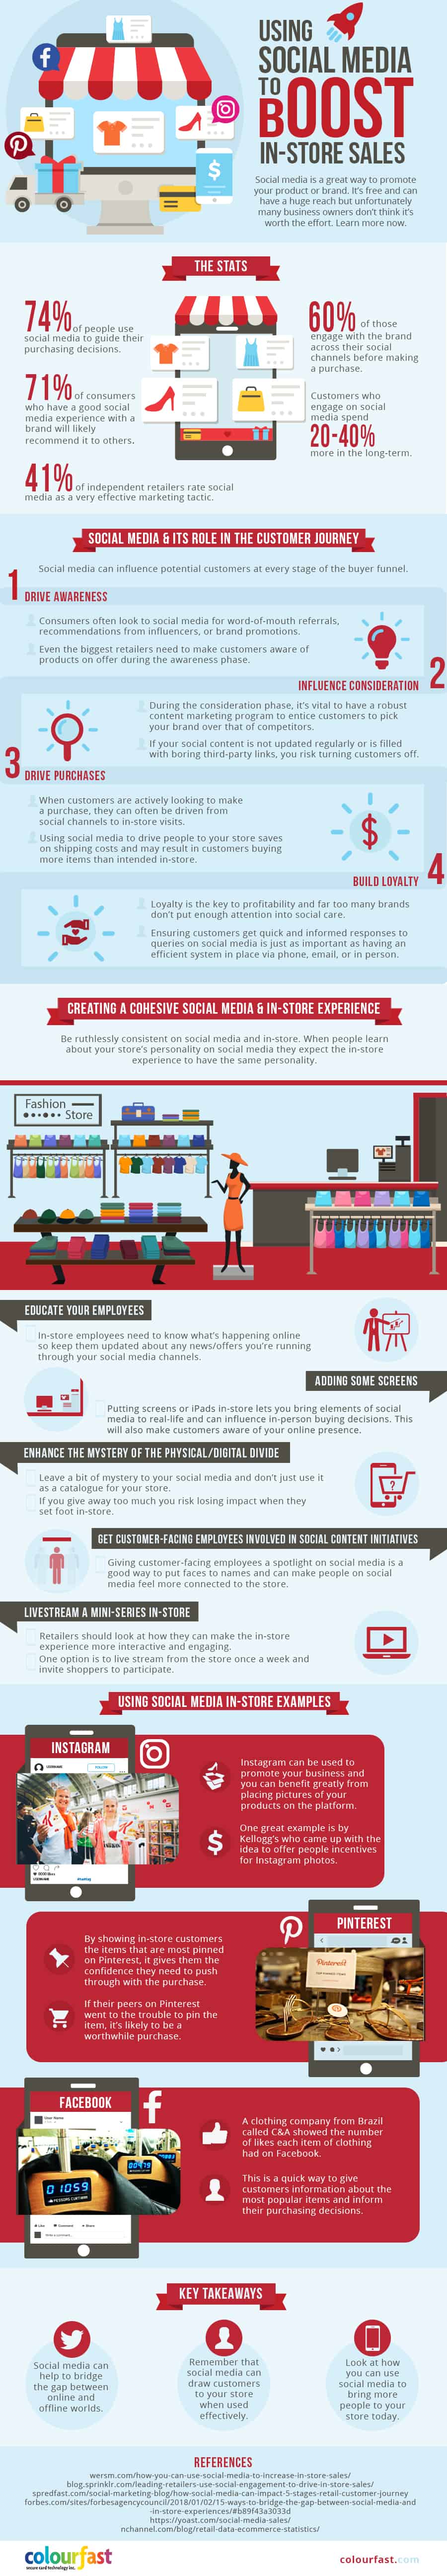 using social media to boost in store sales infographic